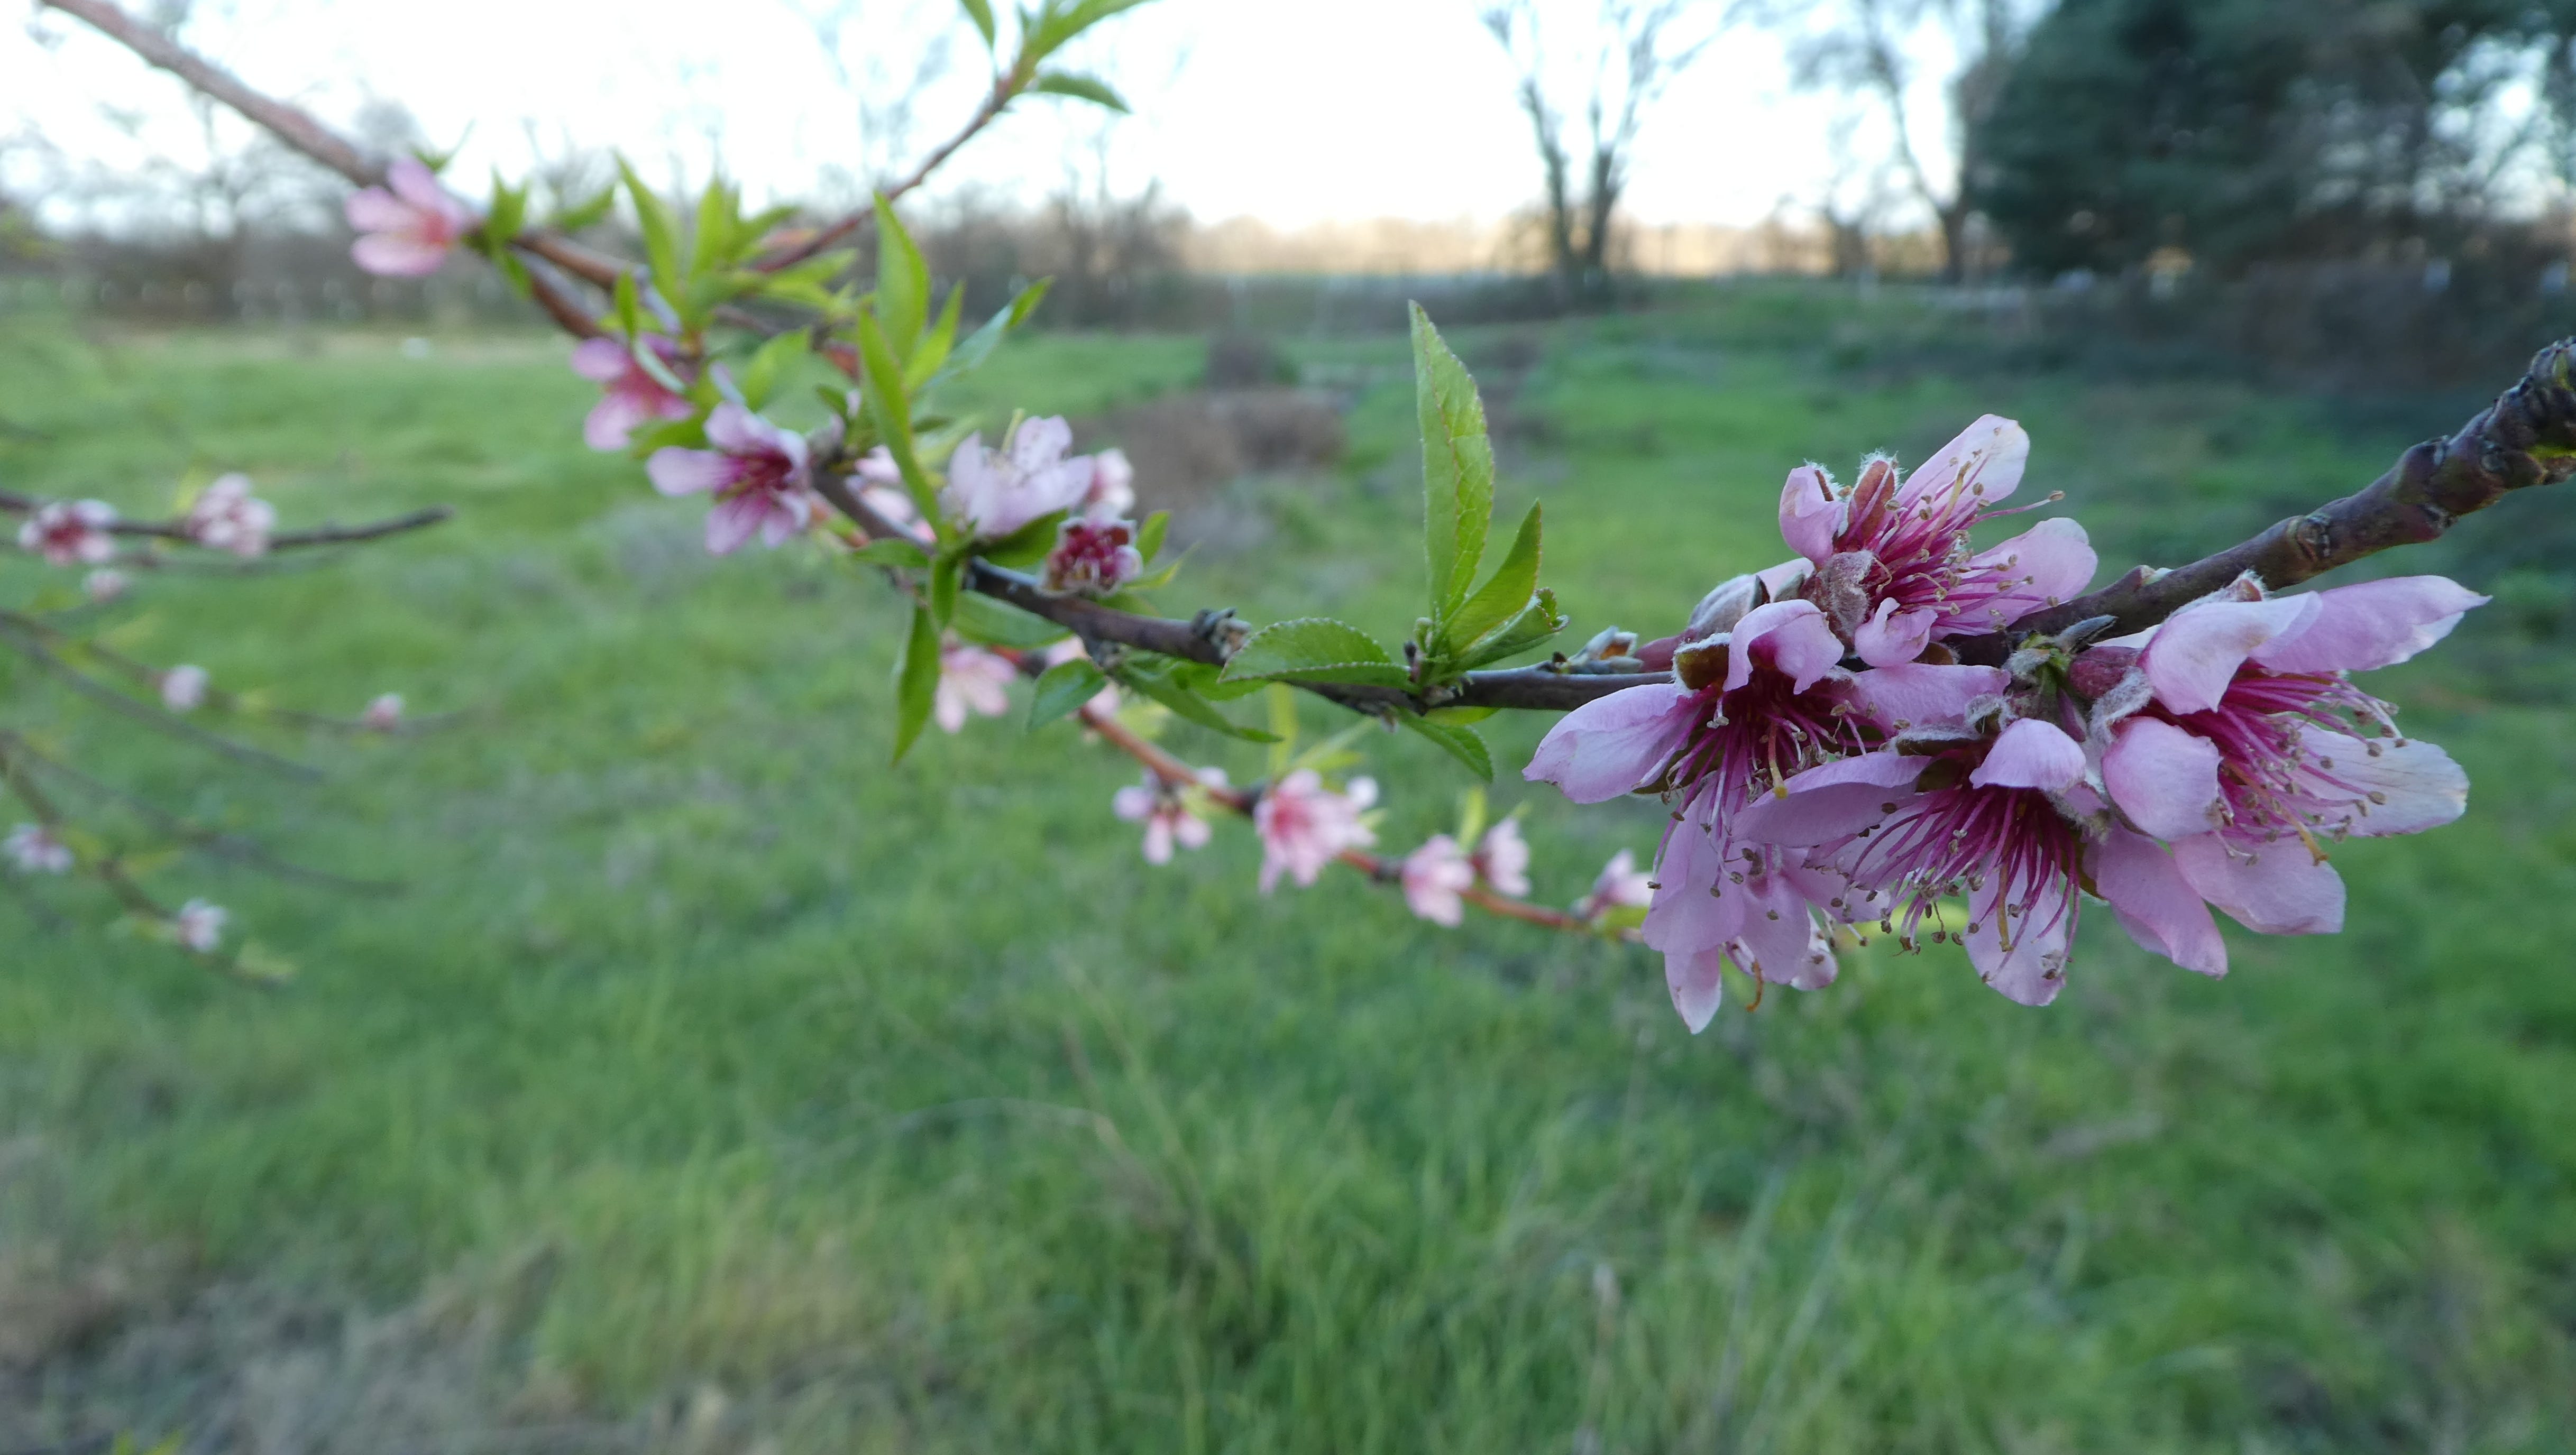 How to protect blooming fruit trees from freezing temperature